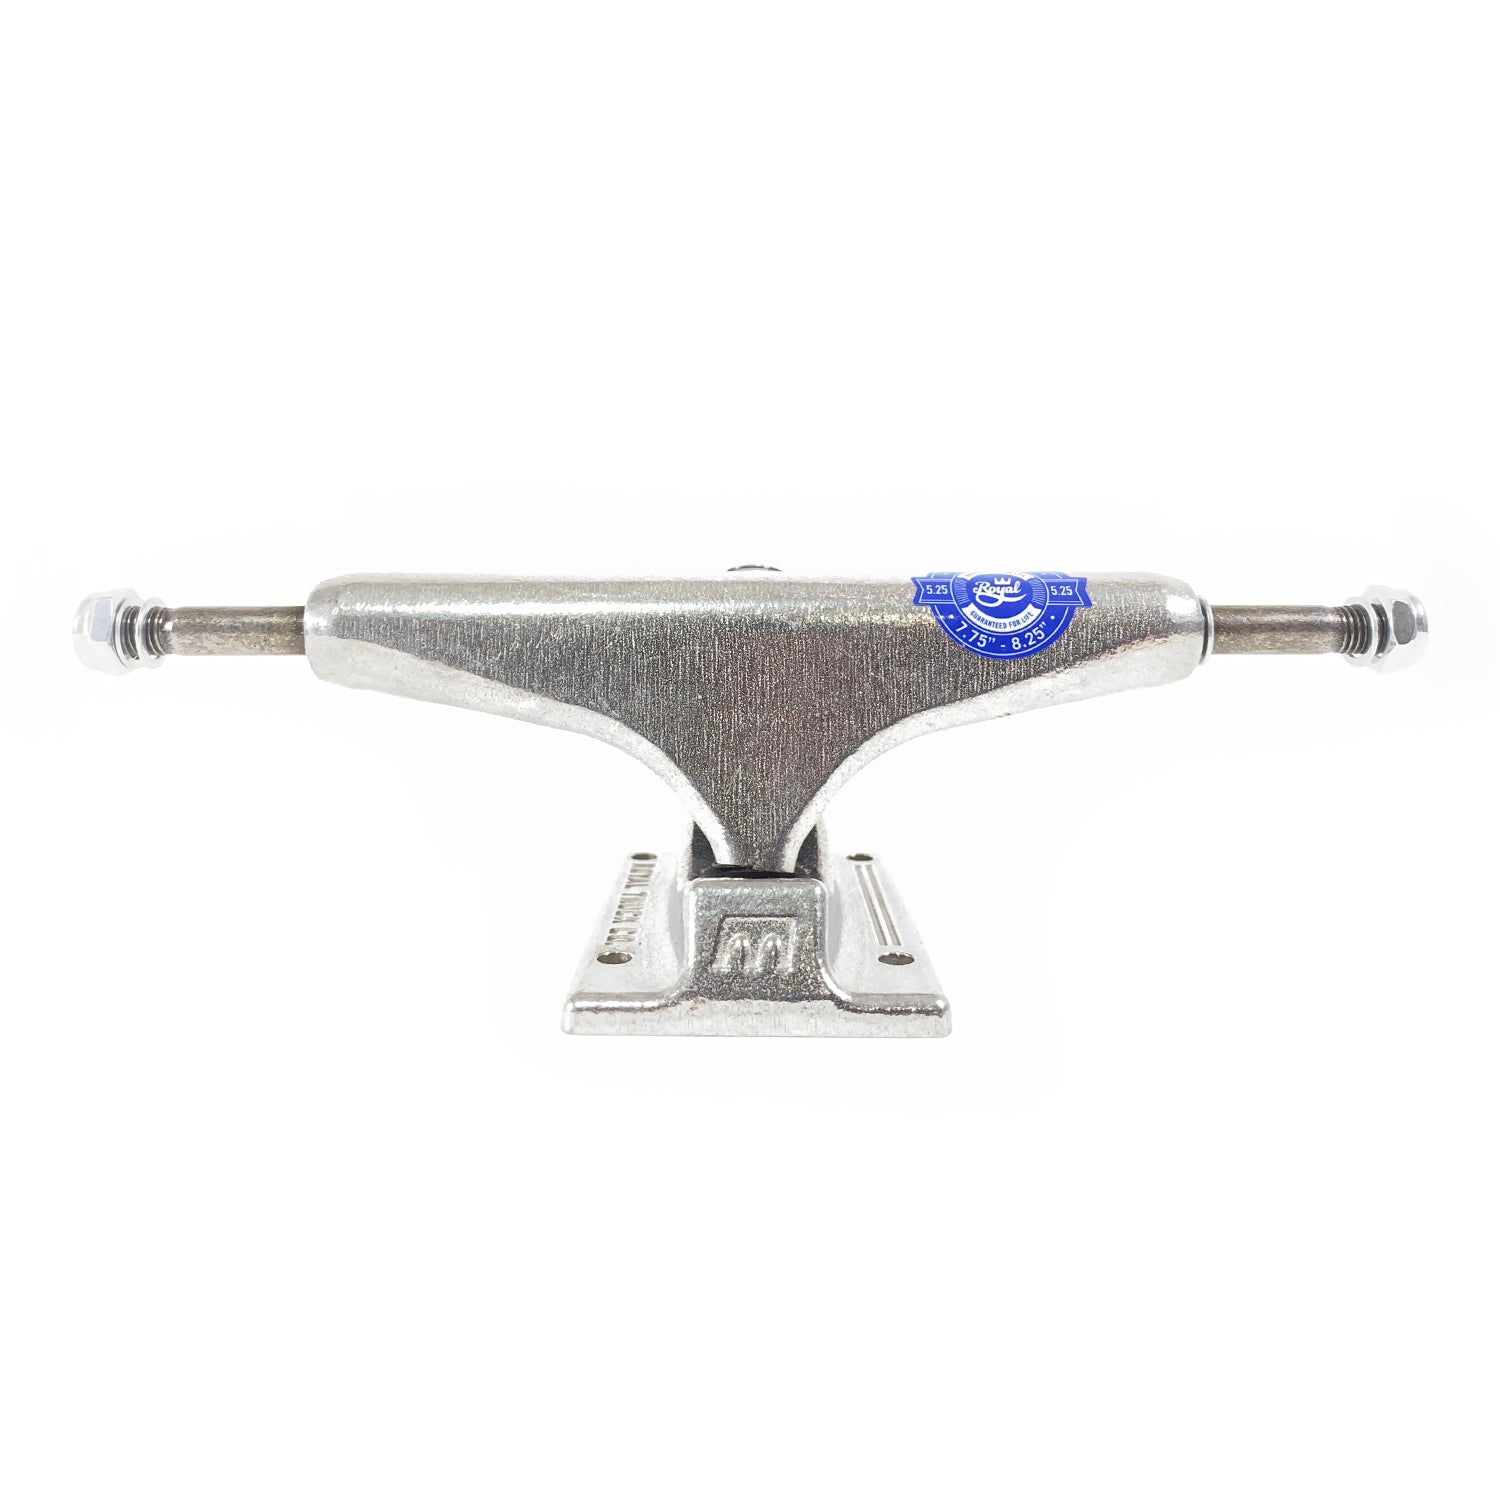 Royal Skateboard Standard Raw Truck 5.0 (8") - Silver - (Sold as a pair) - Prime Delux Store